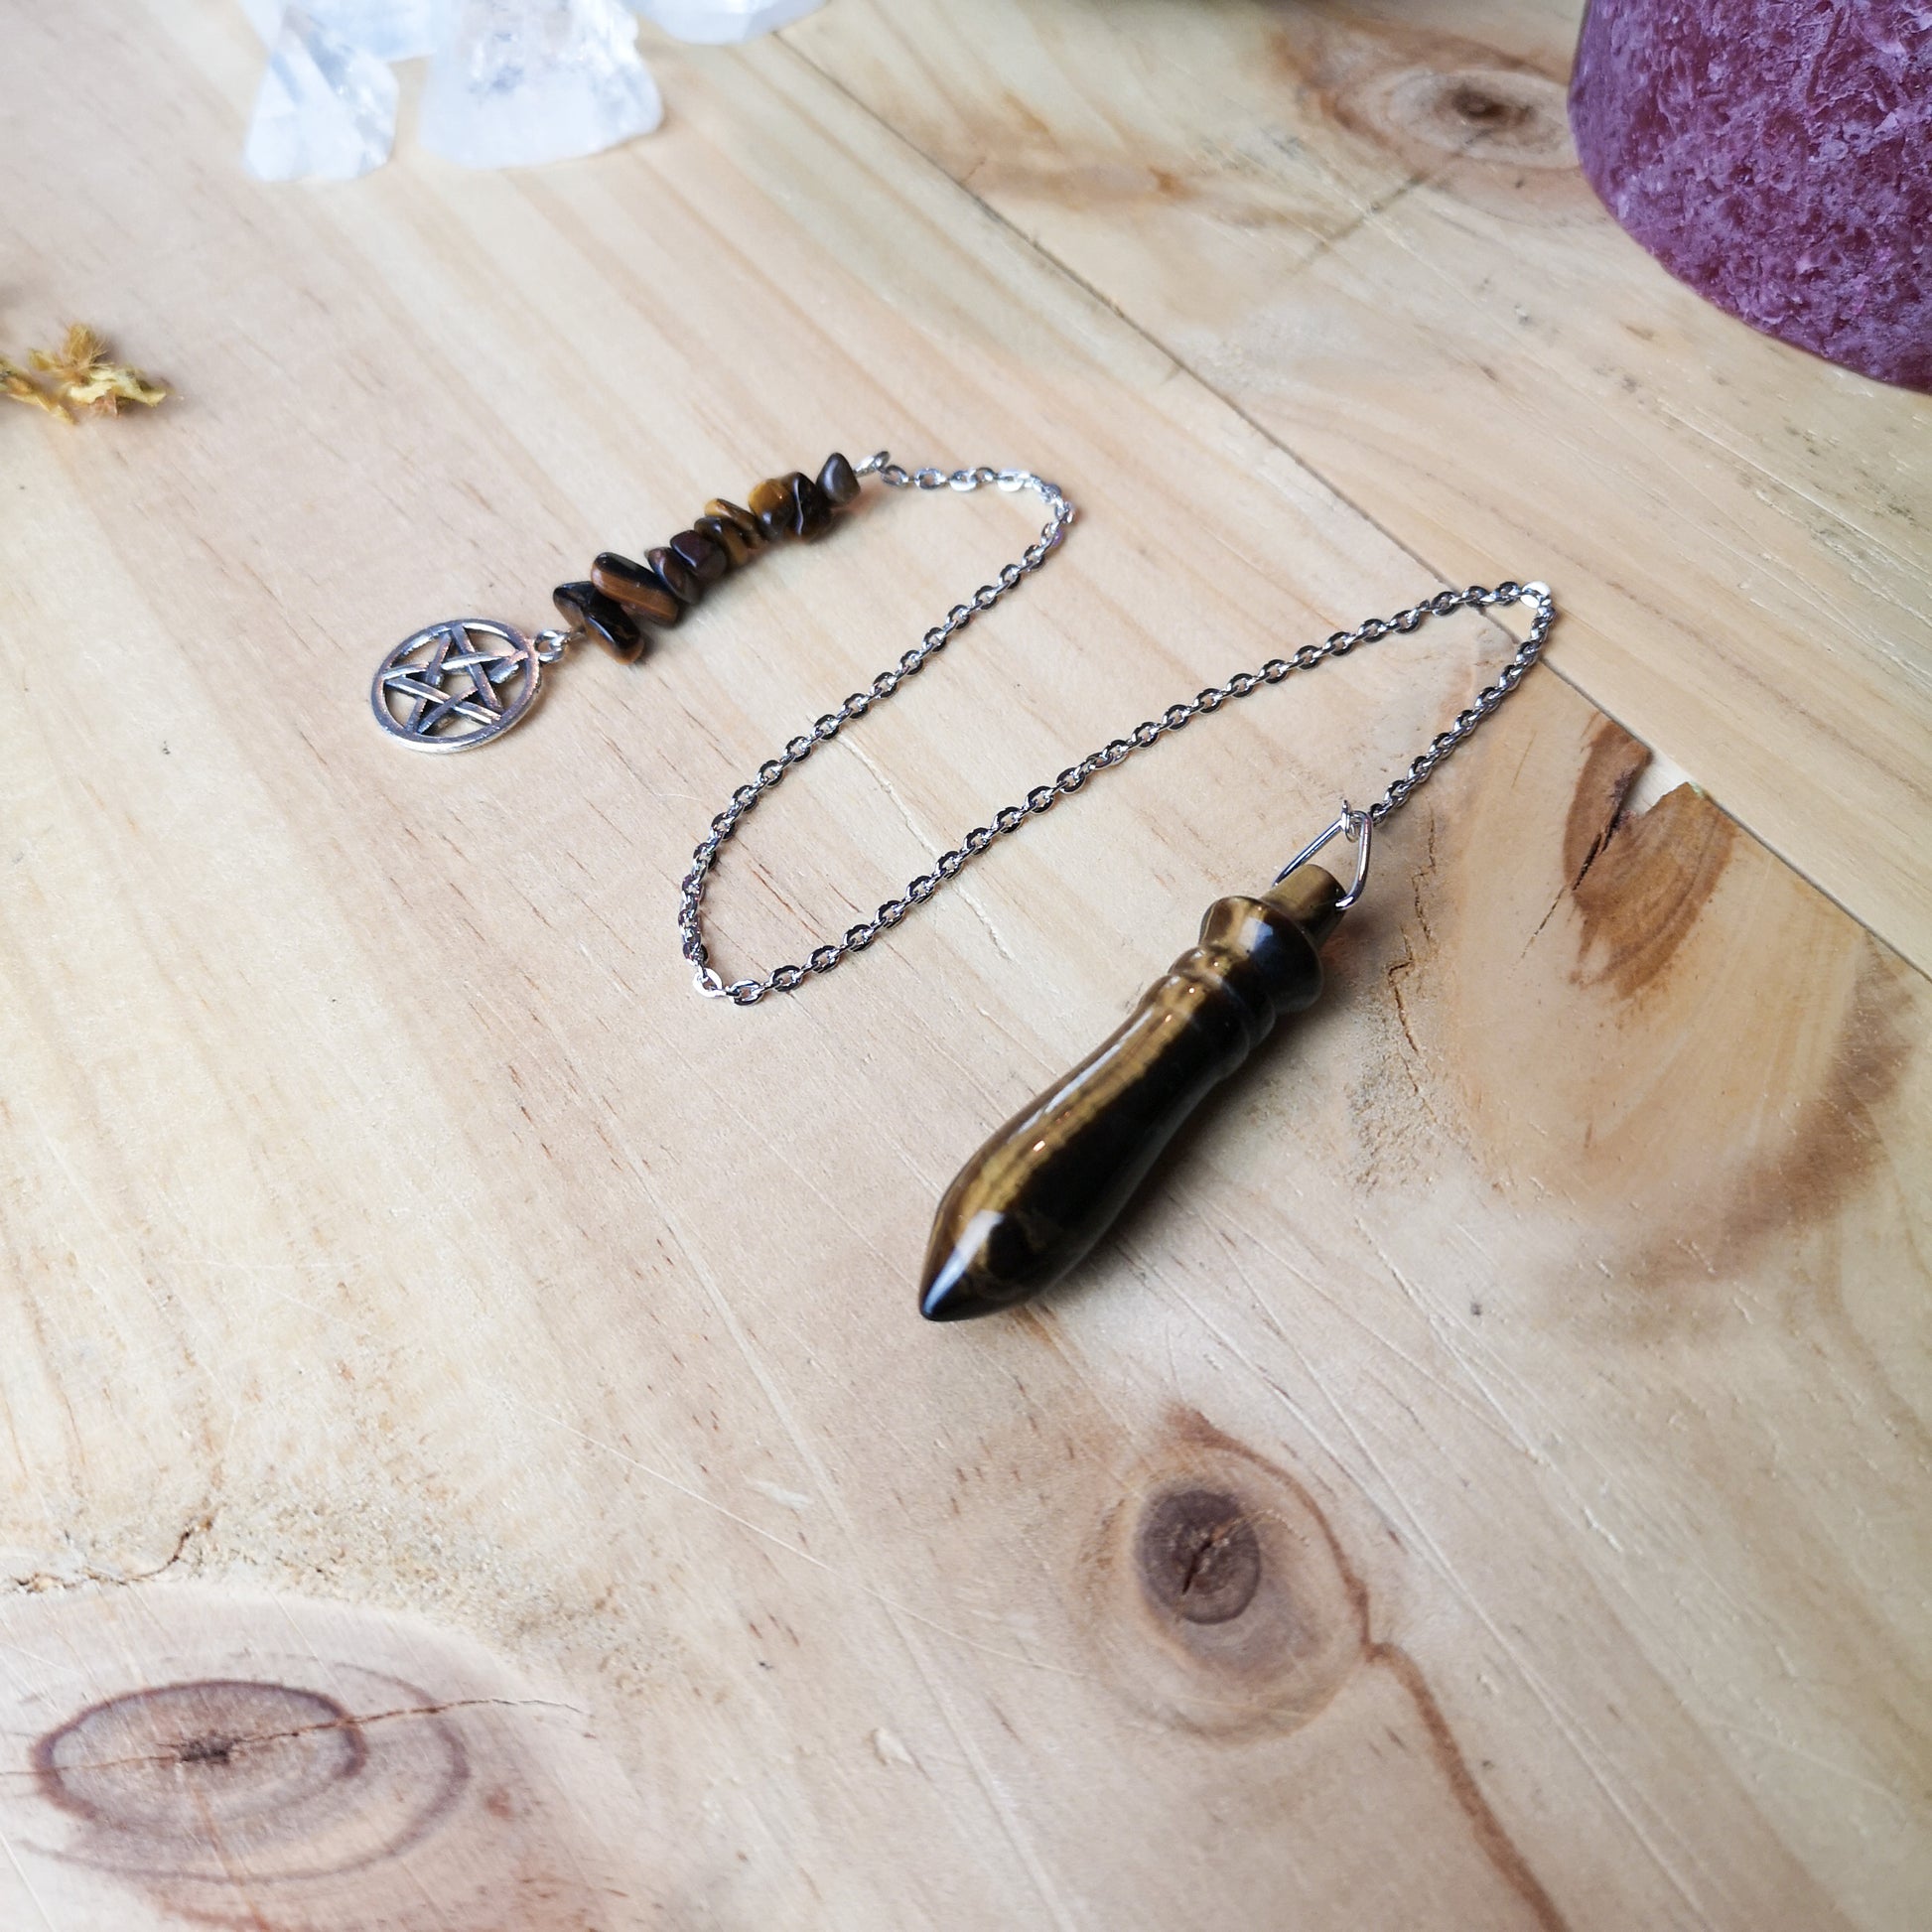 Egyptian Thot pendulum tiger eye and pentacle - The French Witch shop